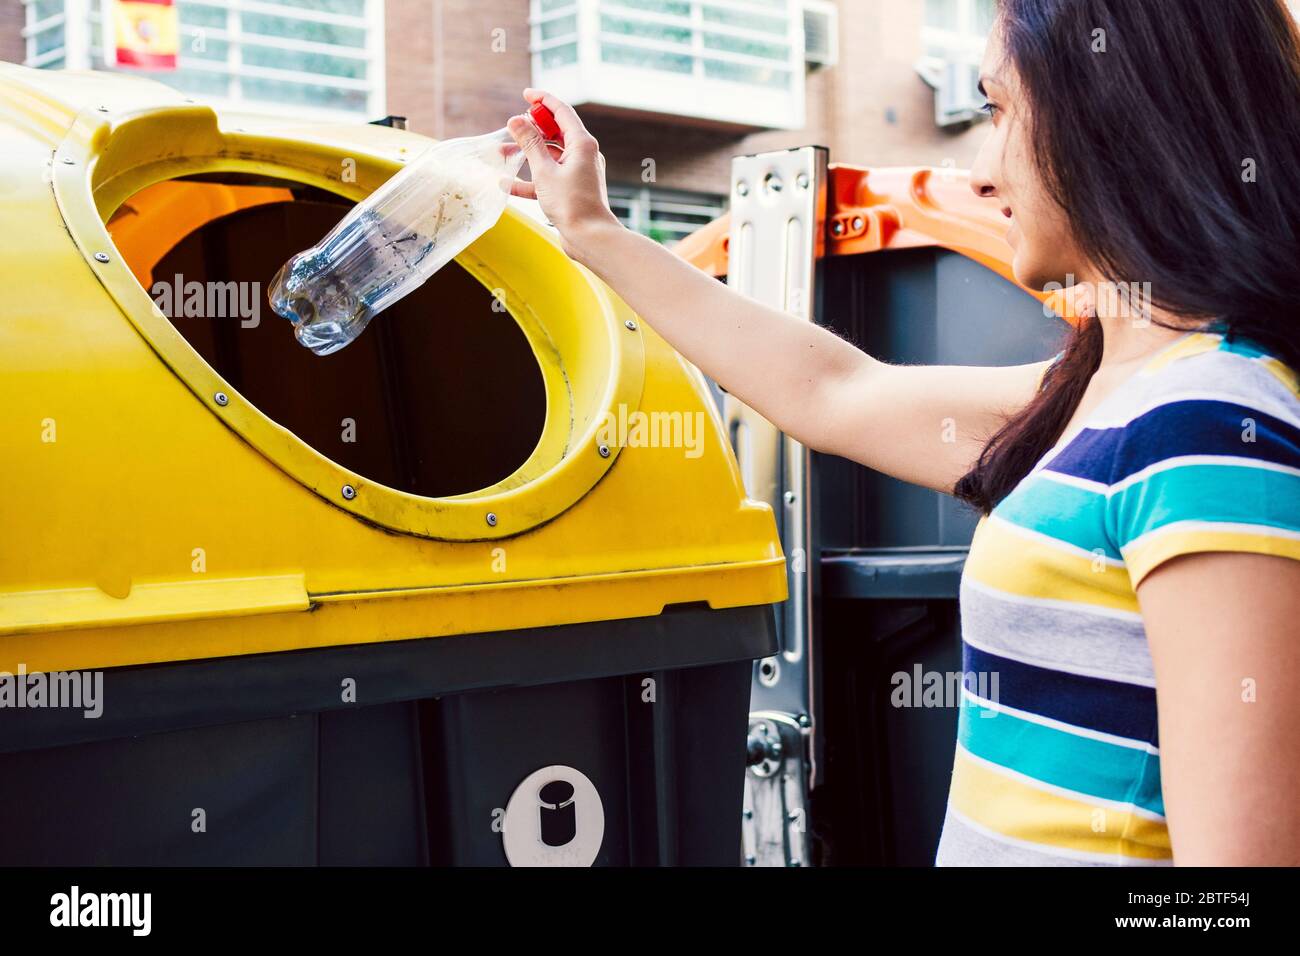 Woman throwing bottle in recycling bin. Recycling concept. Stock Photo